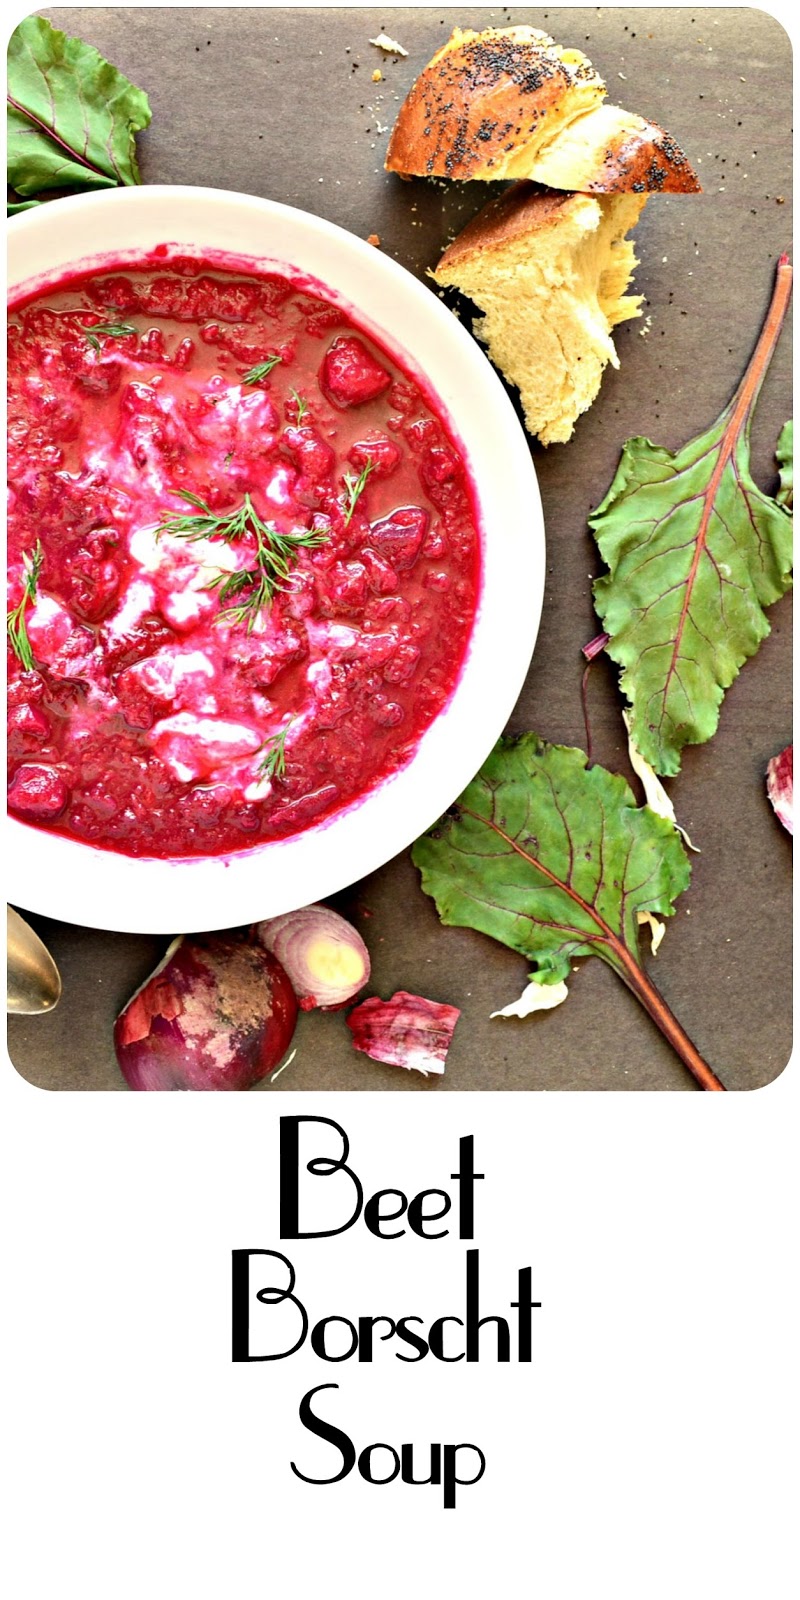 This is How I Cook: Beet Borscht Soup from The Old Country